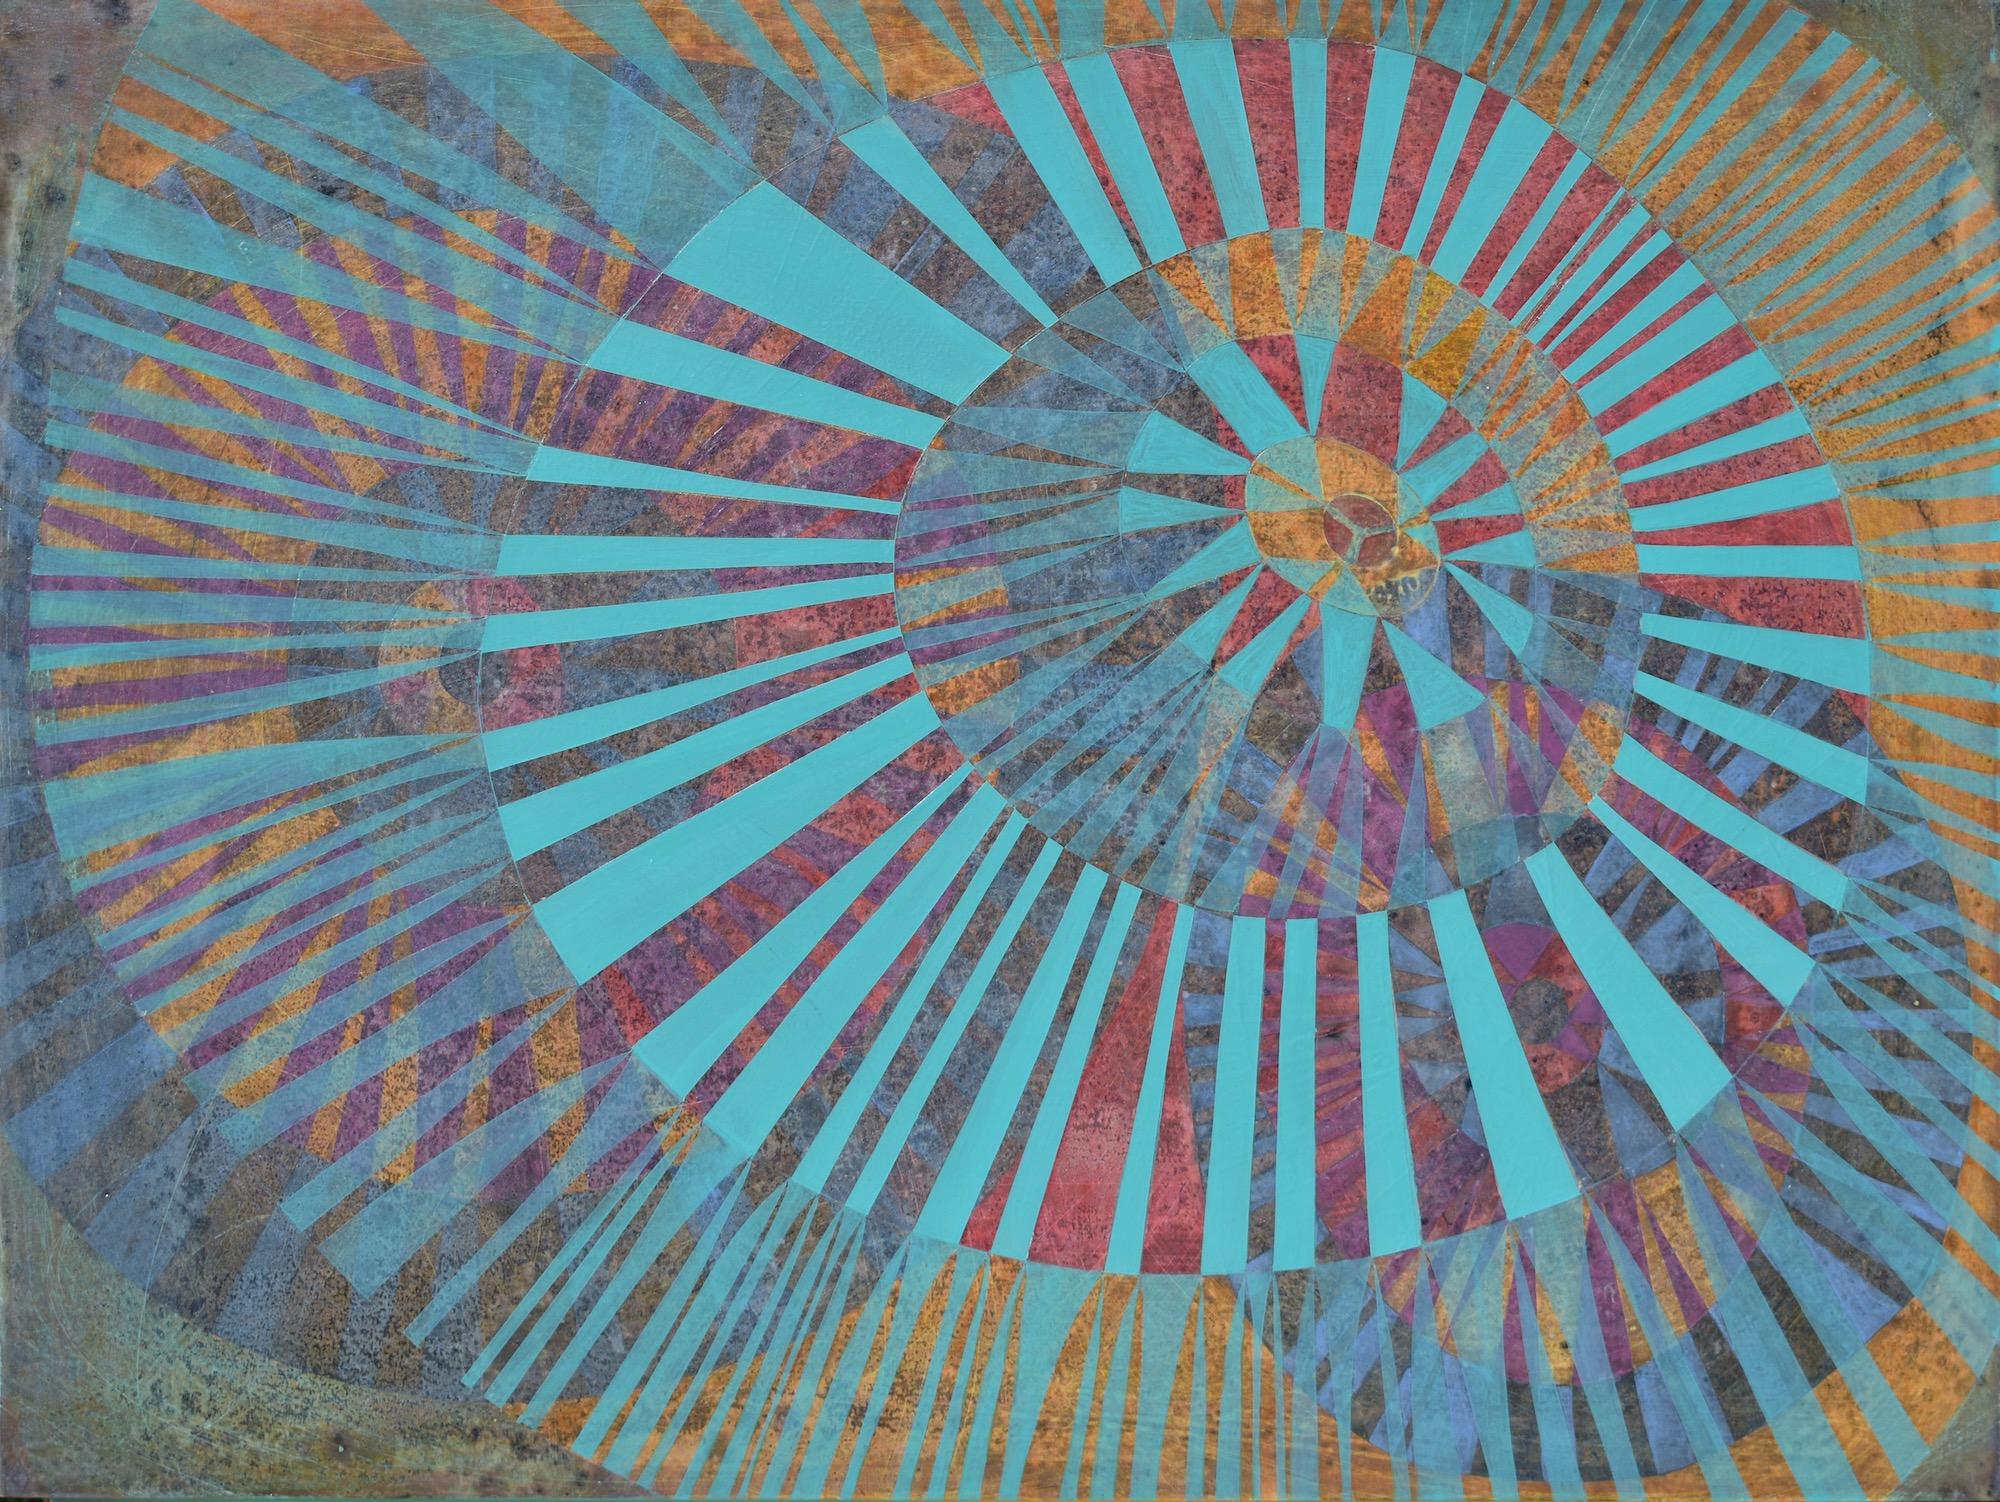 "Influence 3", abstract, teal, blue, ochre, rose, spokes, acrylic painting - Painting by Denise Driscoll